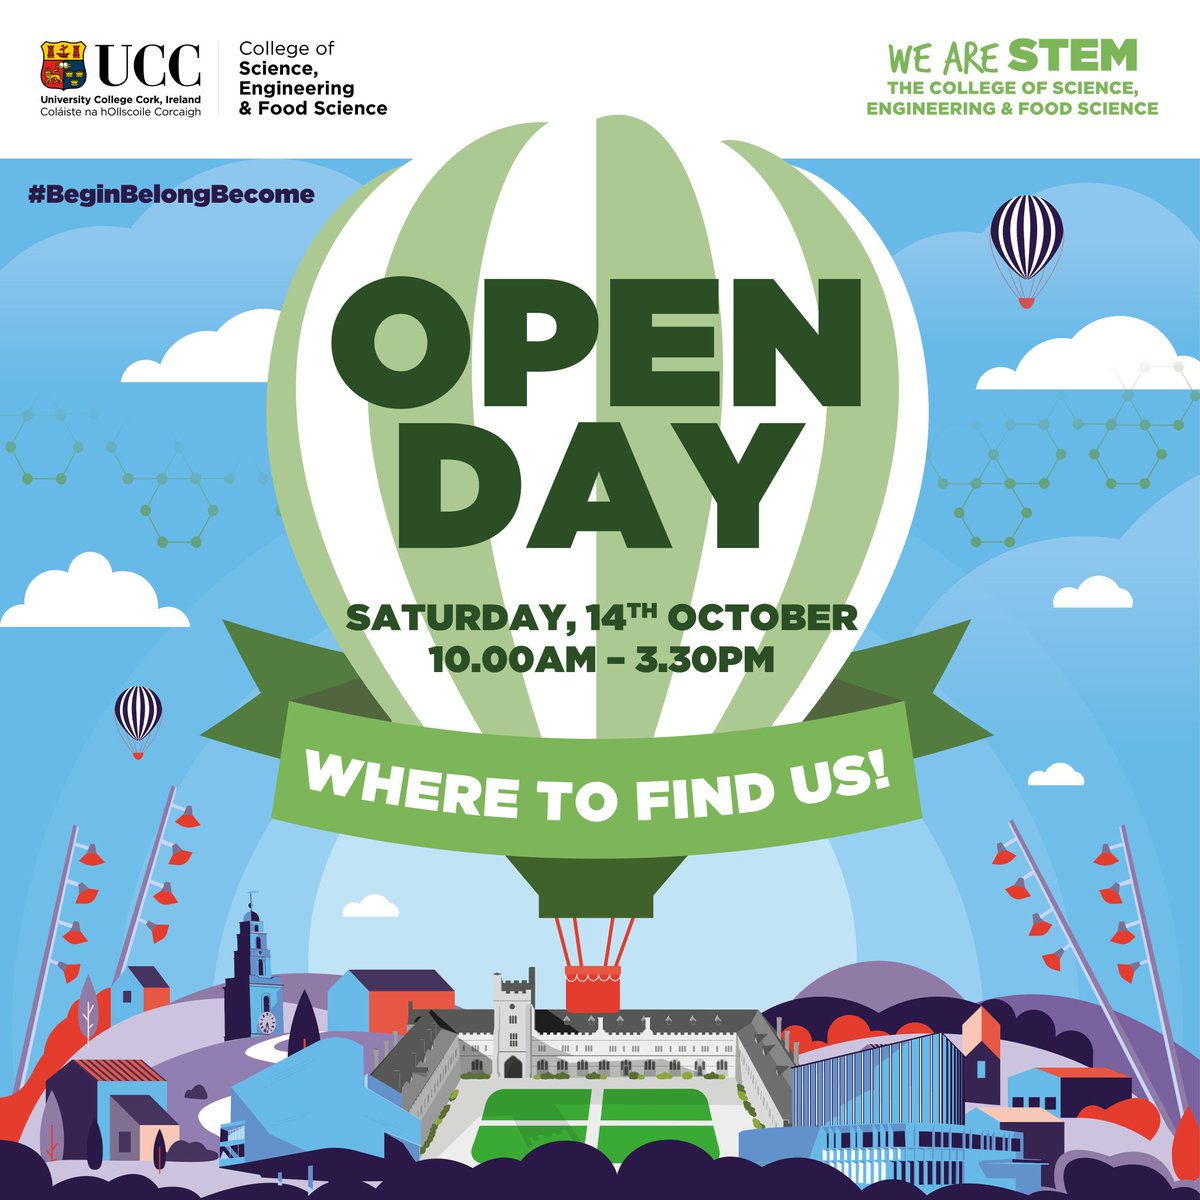 We are busy preparing for this year's #UCCopenday. Come and visit the BEES stand in the Western Gateway Building and learn more about our wide range of courses. bees.ucc.ie